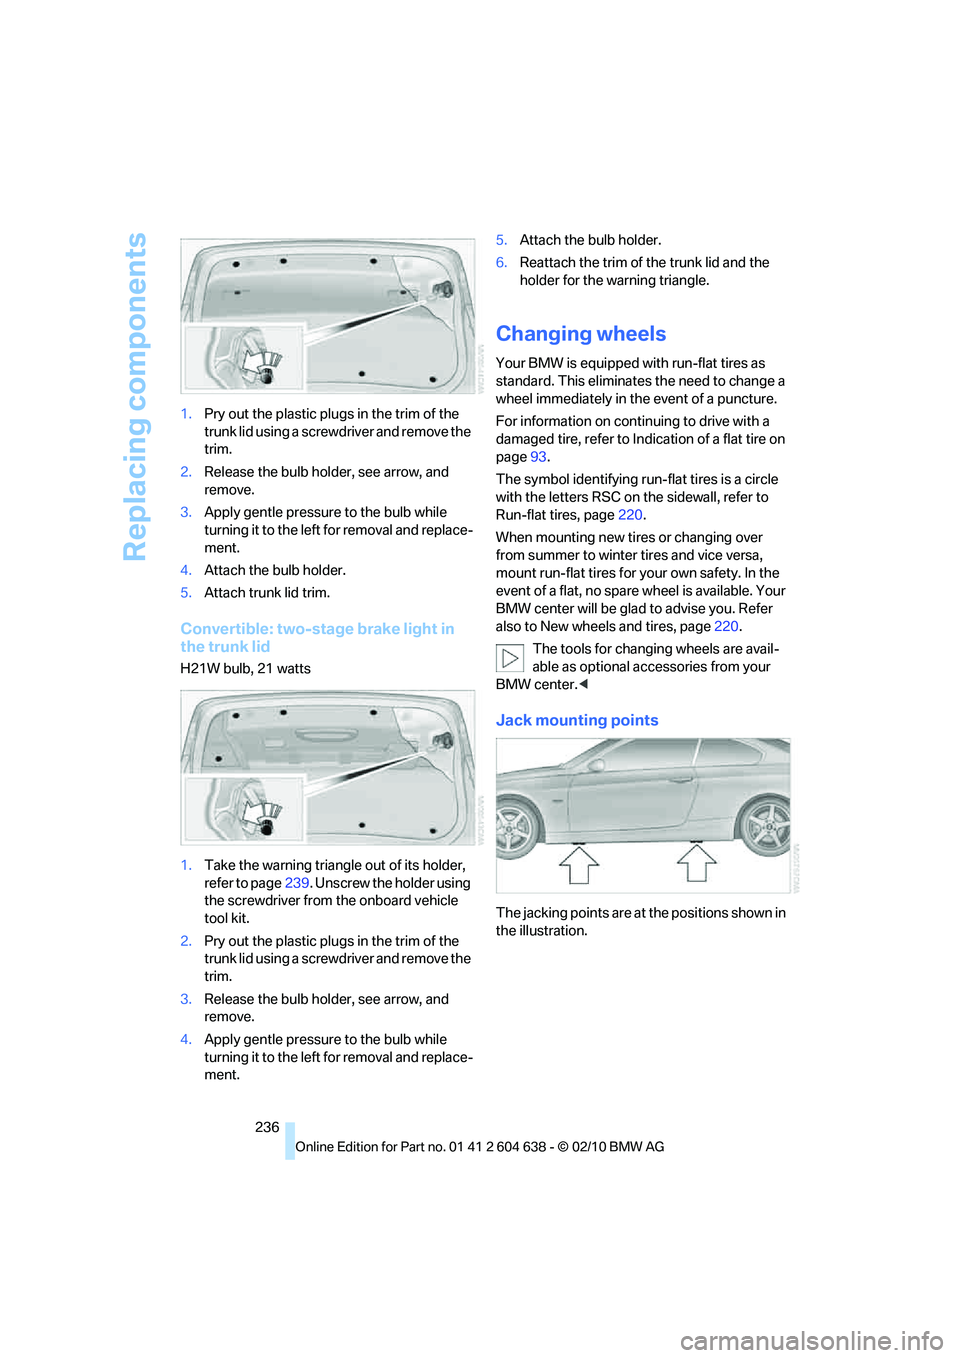 BMW M3 2011  Owners Manual Replacing components
236 1.Pry out the plastic plugs in the trim of the 
trunk lid using a screwdriver and remove the 
trim.
2.Release the bulb holder, see arrow, and 
remove.
3.Apply gentle pressure 